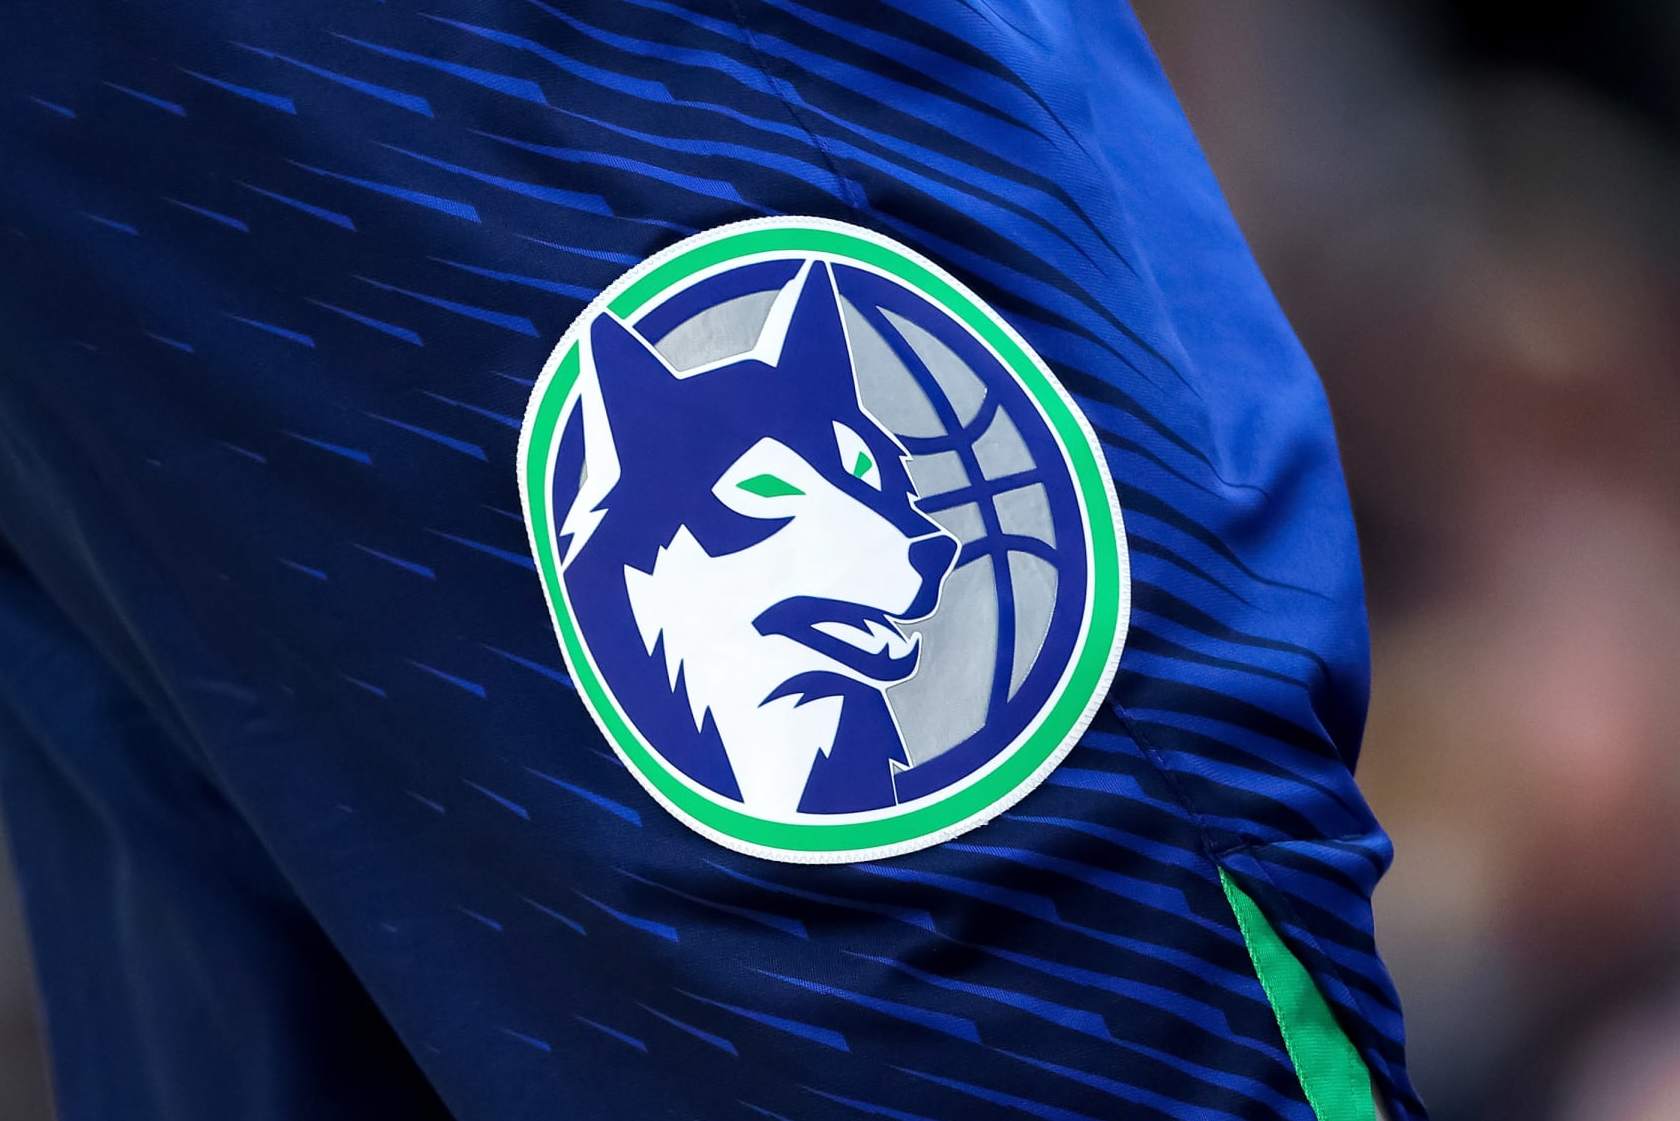 NBA: Timberwolves Release Classic Edition Uniforms Celebrating 35th  Anniversary Season - Canis Hoopus